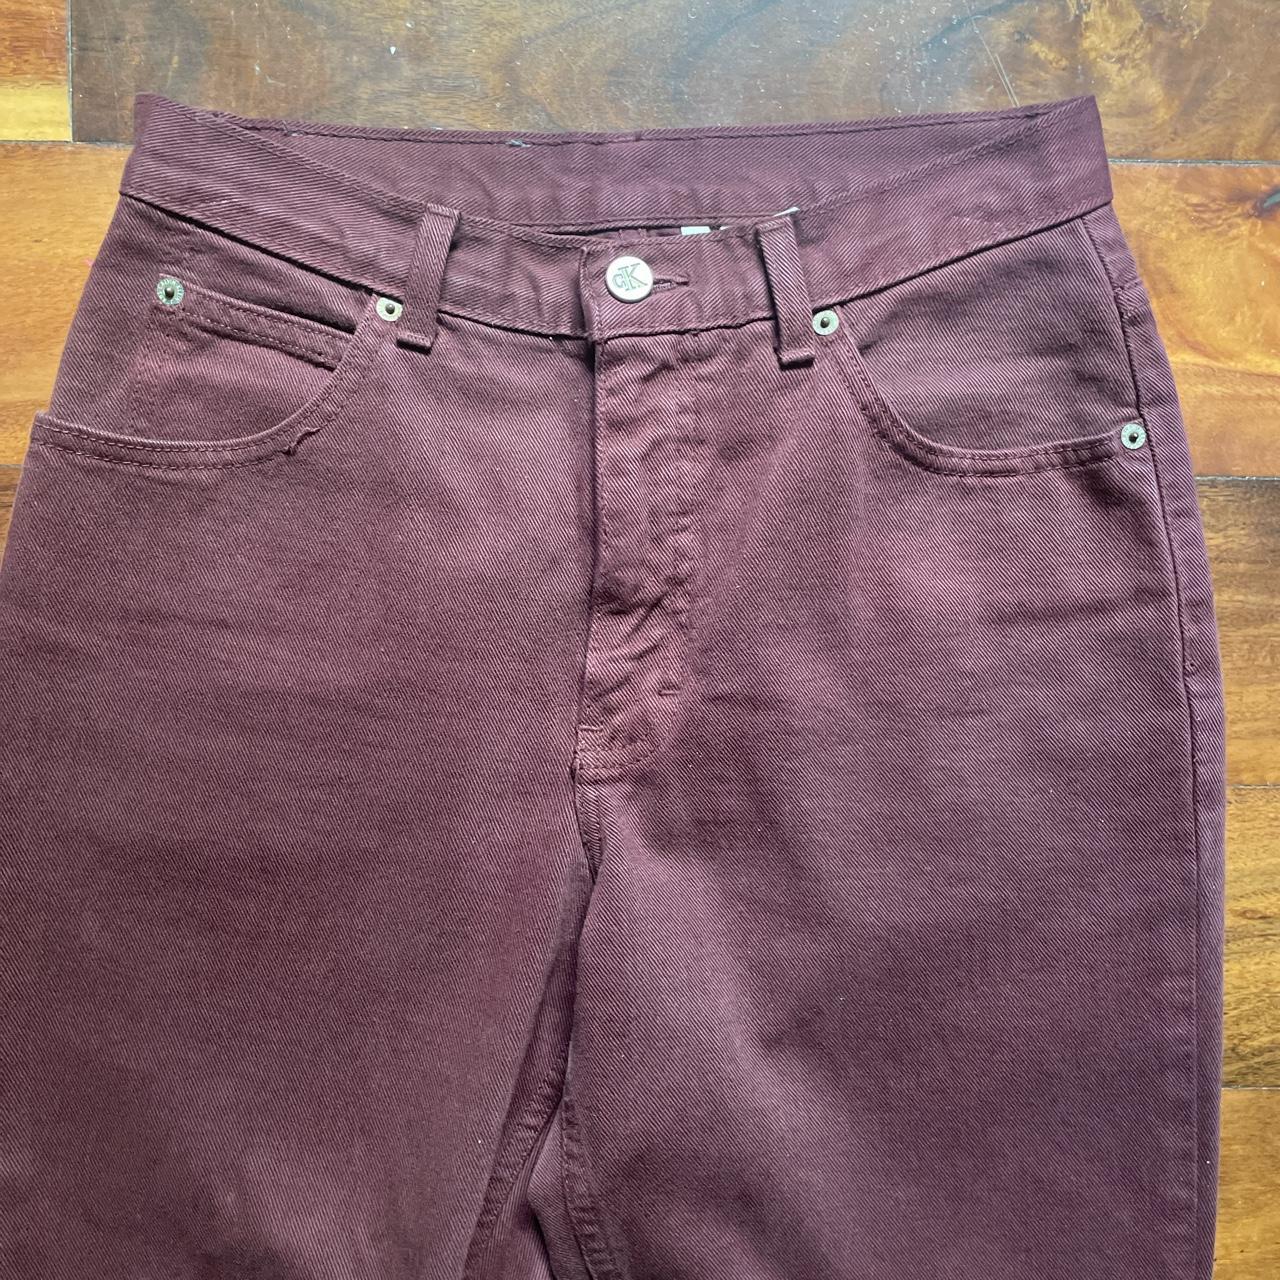 Product Image 2 - Maroon high waisted jeans by